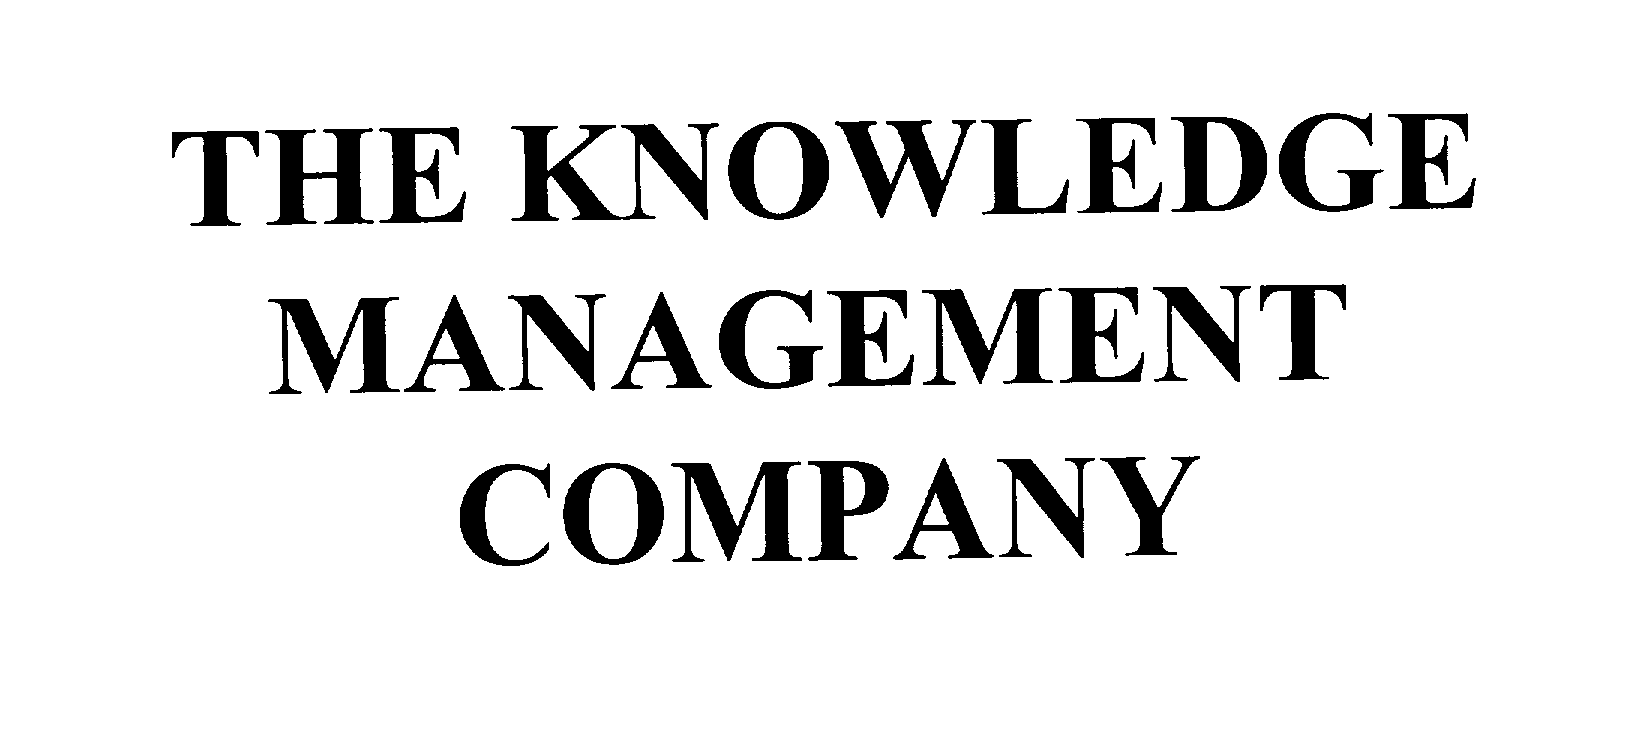  THE KNOWLEDGE MANAGEMENT COMPANY